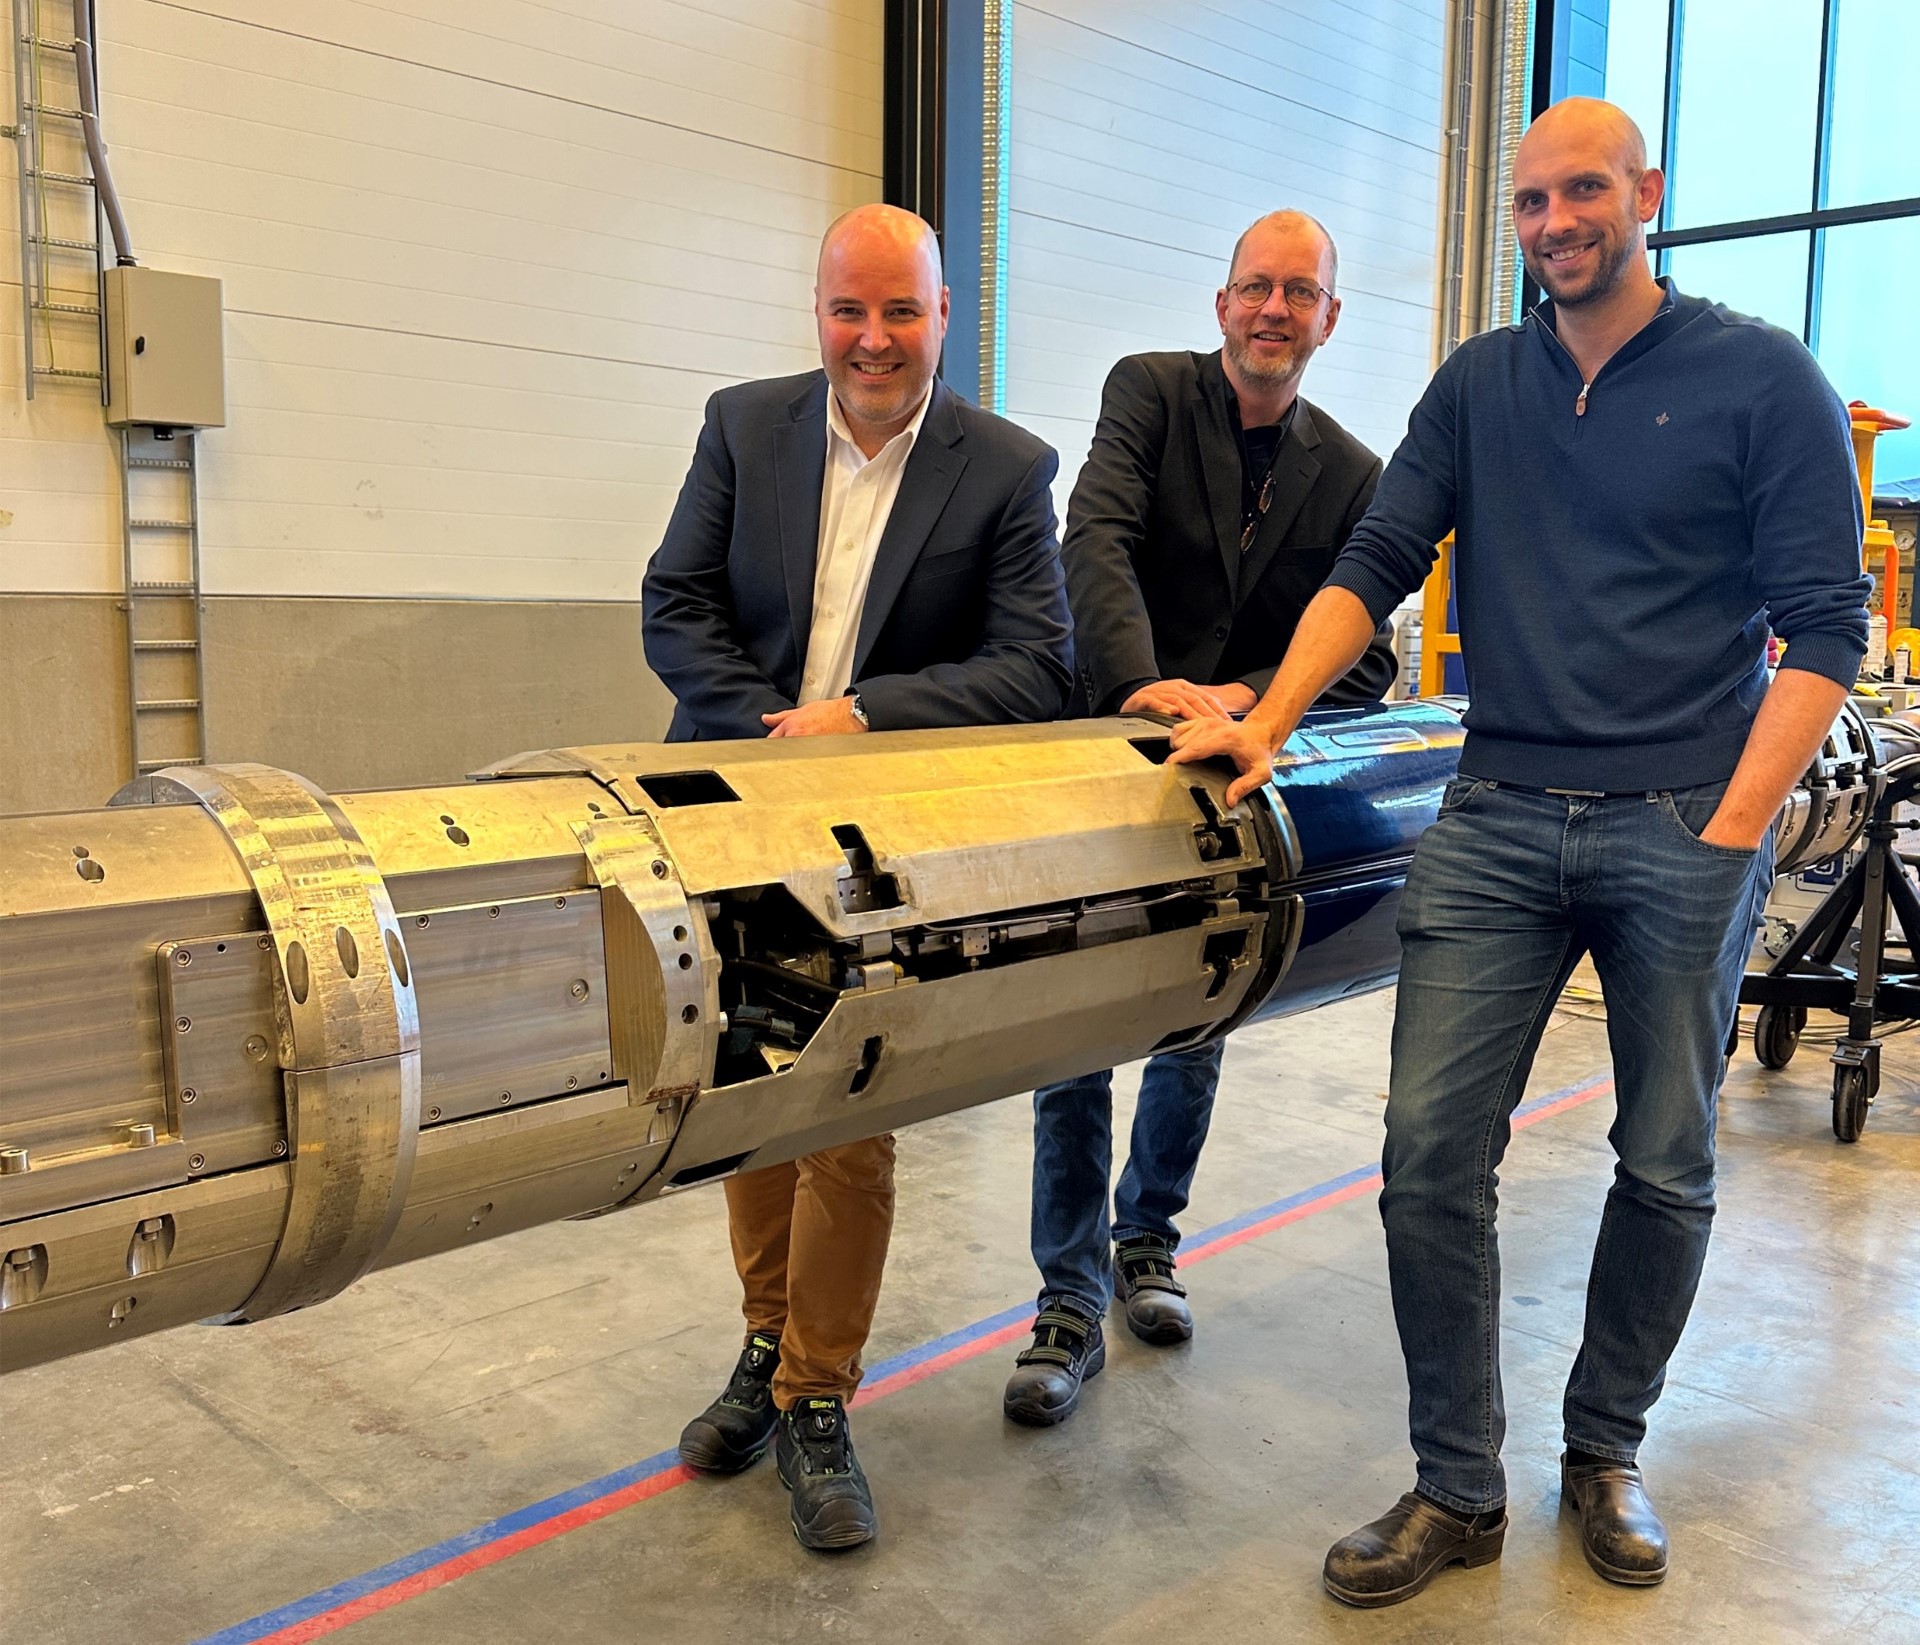 Norwegian state-owned energy giant Equinor has contracted a compatriot provider of subsea solutions for the oil & gas industry, Optime Subsea, to deliver two remotely operated systems (ROCS) at the operator’s Irpa field